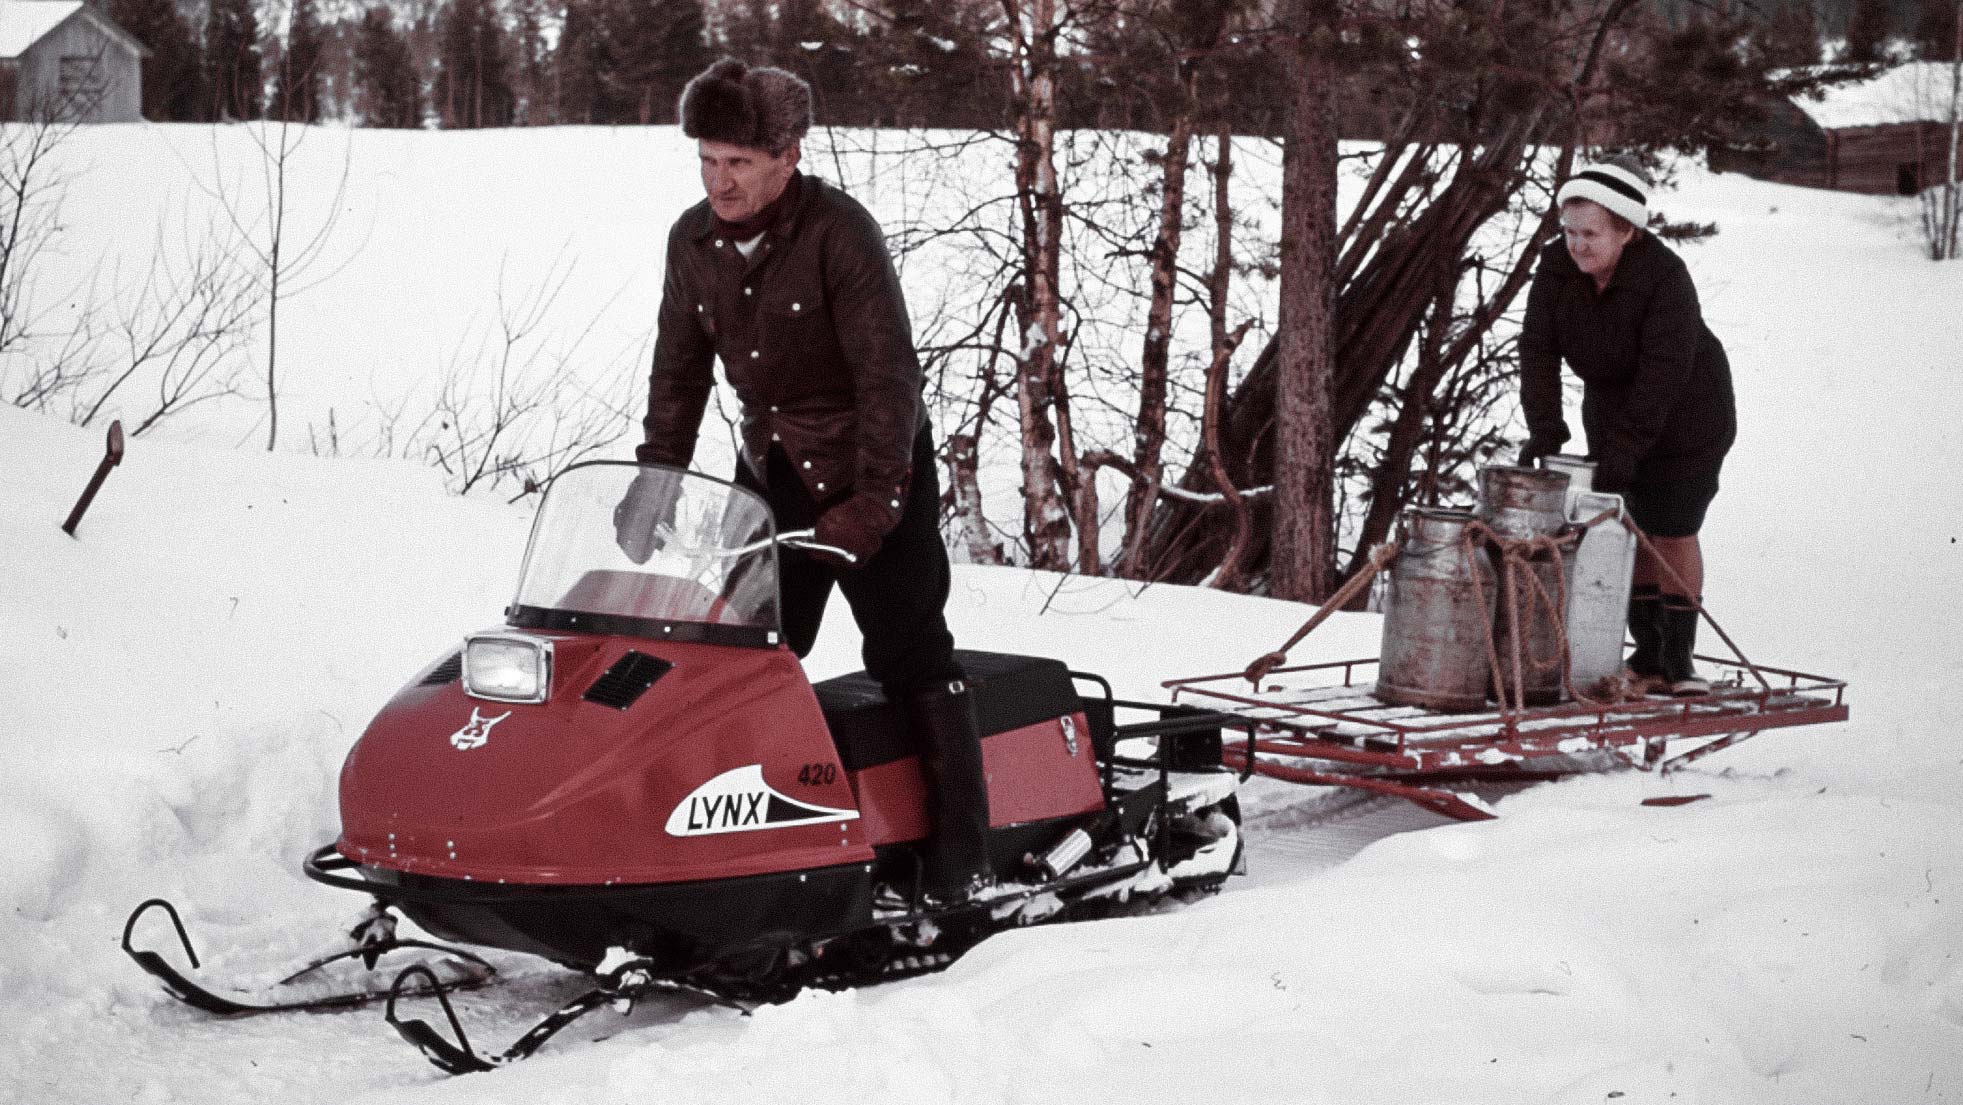 Couple towing a sleigh with Lynx 420 1974 snowmobile